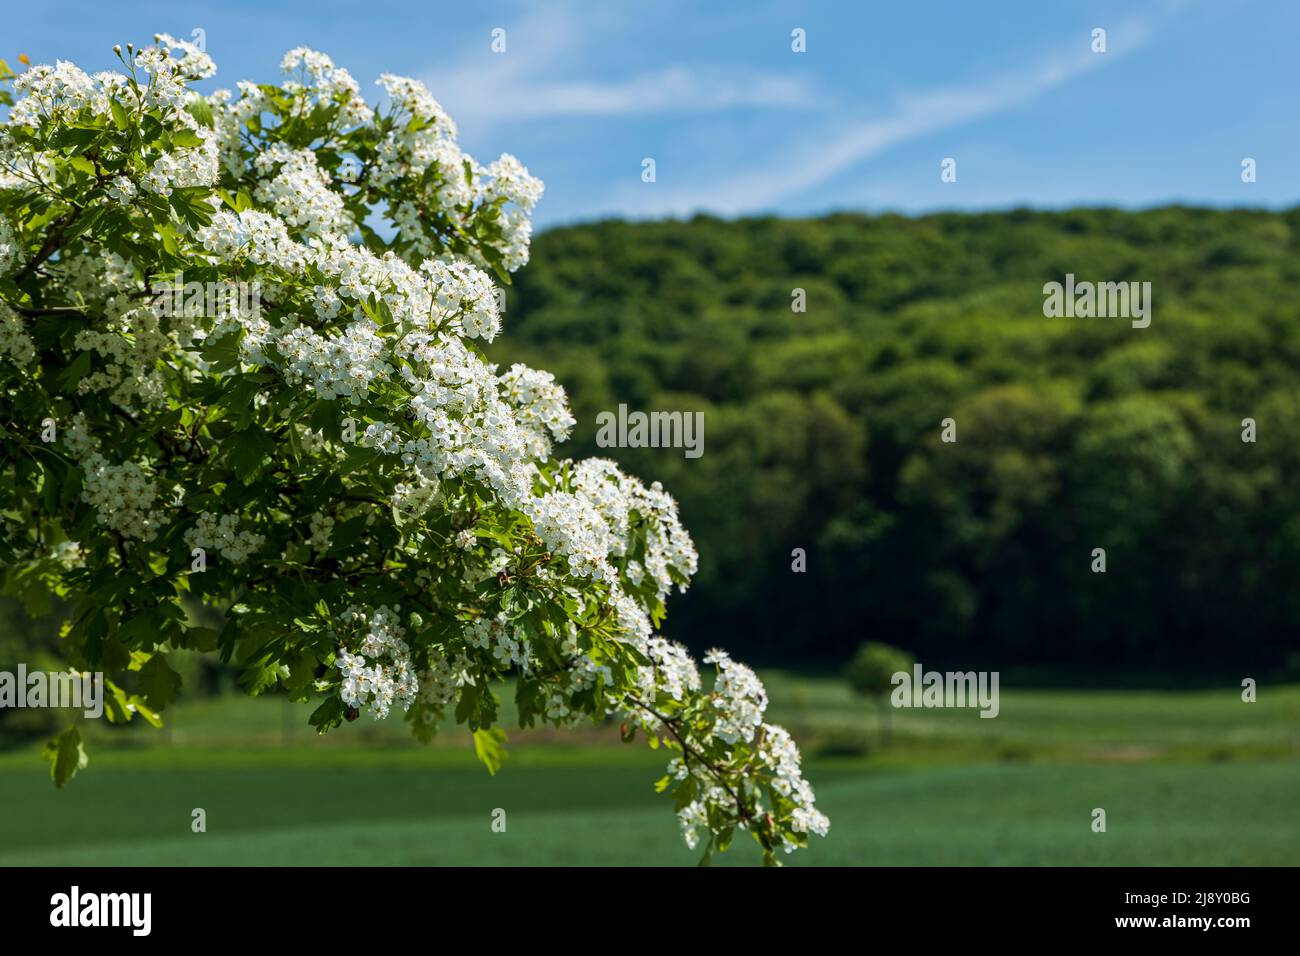 a hawthorn branch full blossoms against a blurred background with forest, field Stock Photo